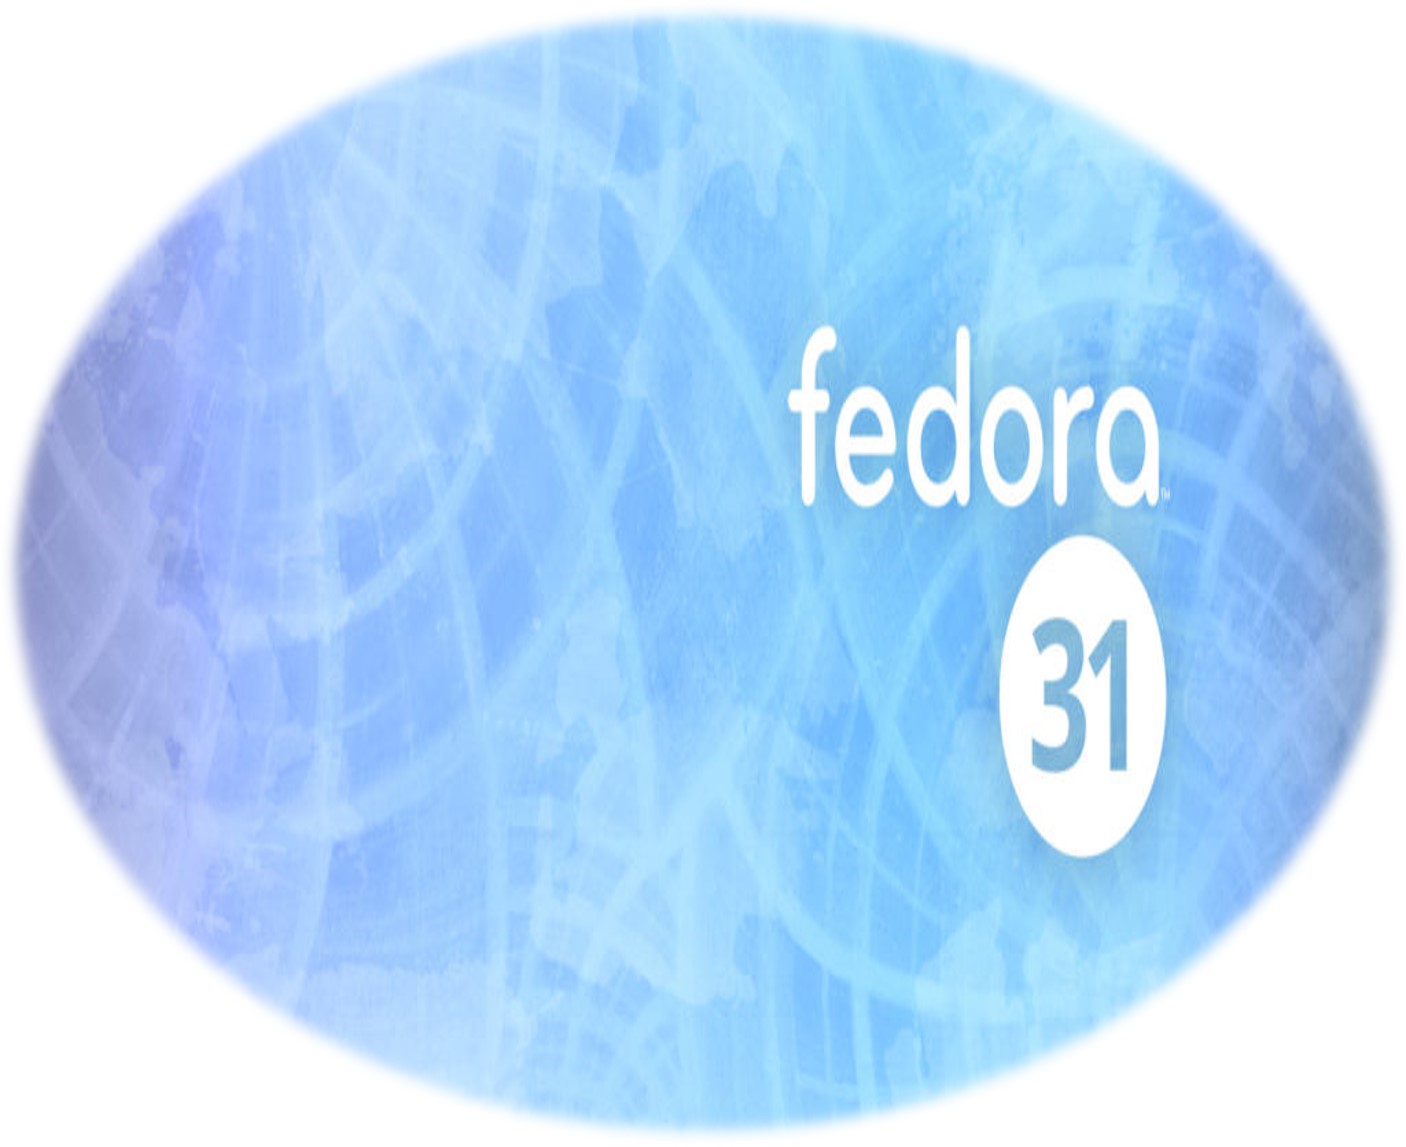 Fedora 31 released to download